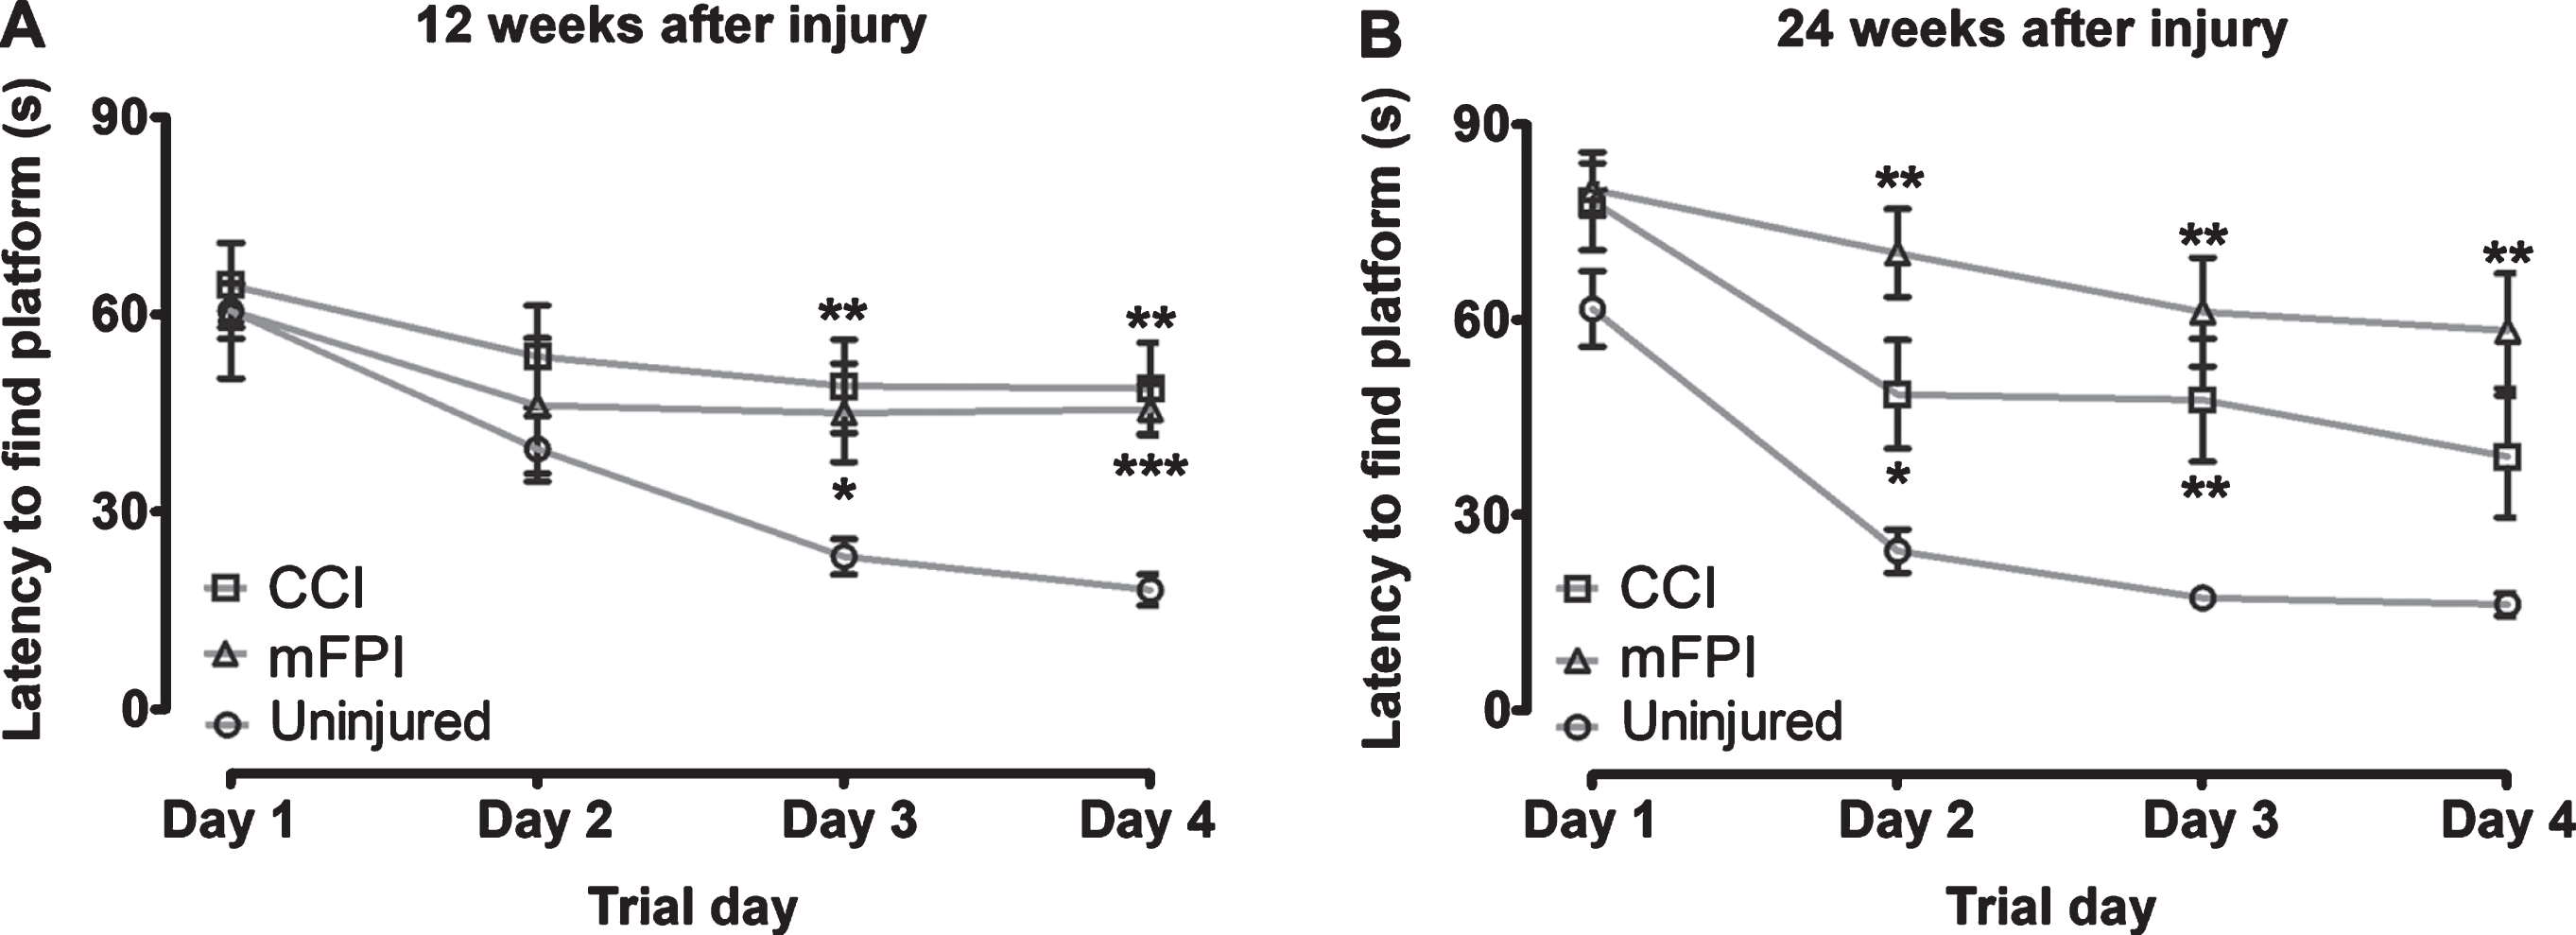 Severe long-term defects in spatial learning in tg-ArcSwe mice following TBI. The tg-ArcSwe mice performed significantly worse in the Morris water maze test, compared to age-matched uninjured tg-ArcSwe mice at both 12-weeks (A) and 24-weeks (B) post-injury. At the later time point, the mice that had received mFPI mice performed worse than the mice that had received CCI. Two-way ANOVA was performed for injury group and trial day. Bonferroni’s post-hoc test was used to describe the differences between the groups.